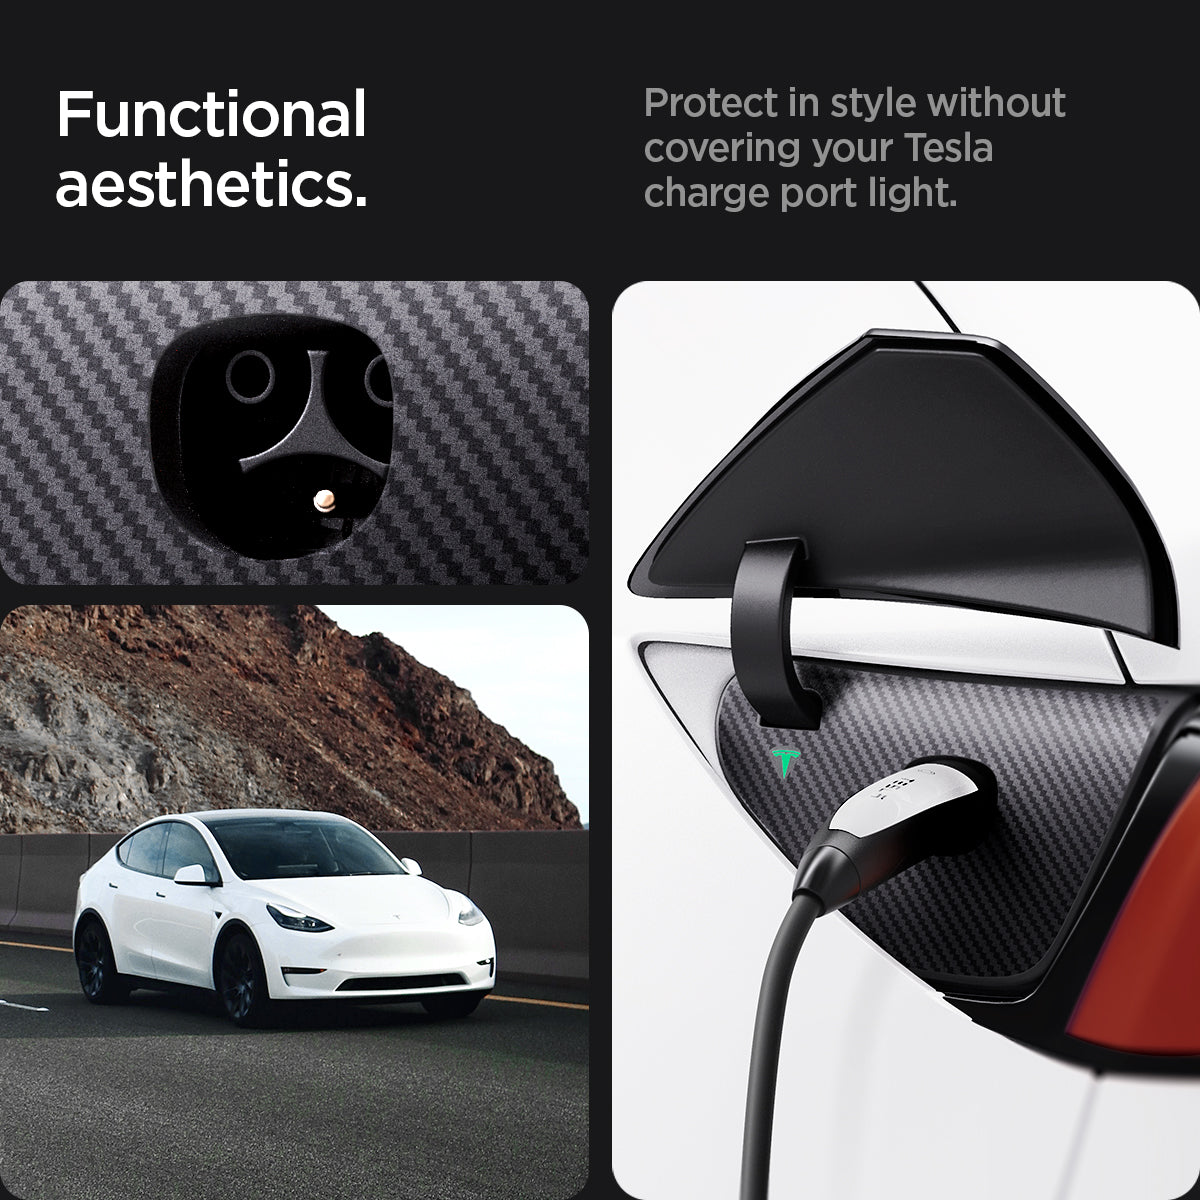 AFL07153 - Tesla Model Y & 3 Charging Port Protective Film in Transparency showing the functional aesthetics, protect in style without covering your Tesla charge port light